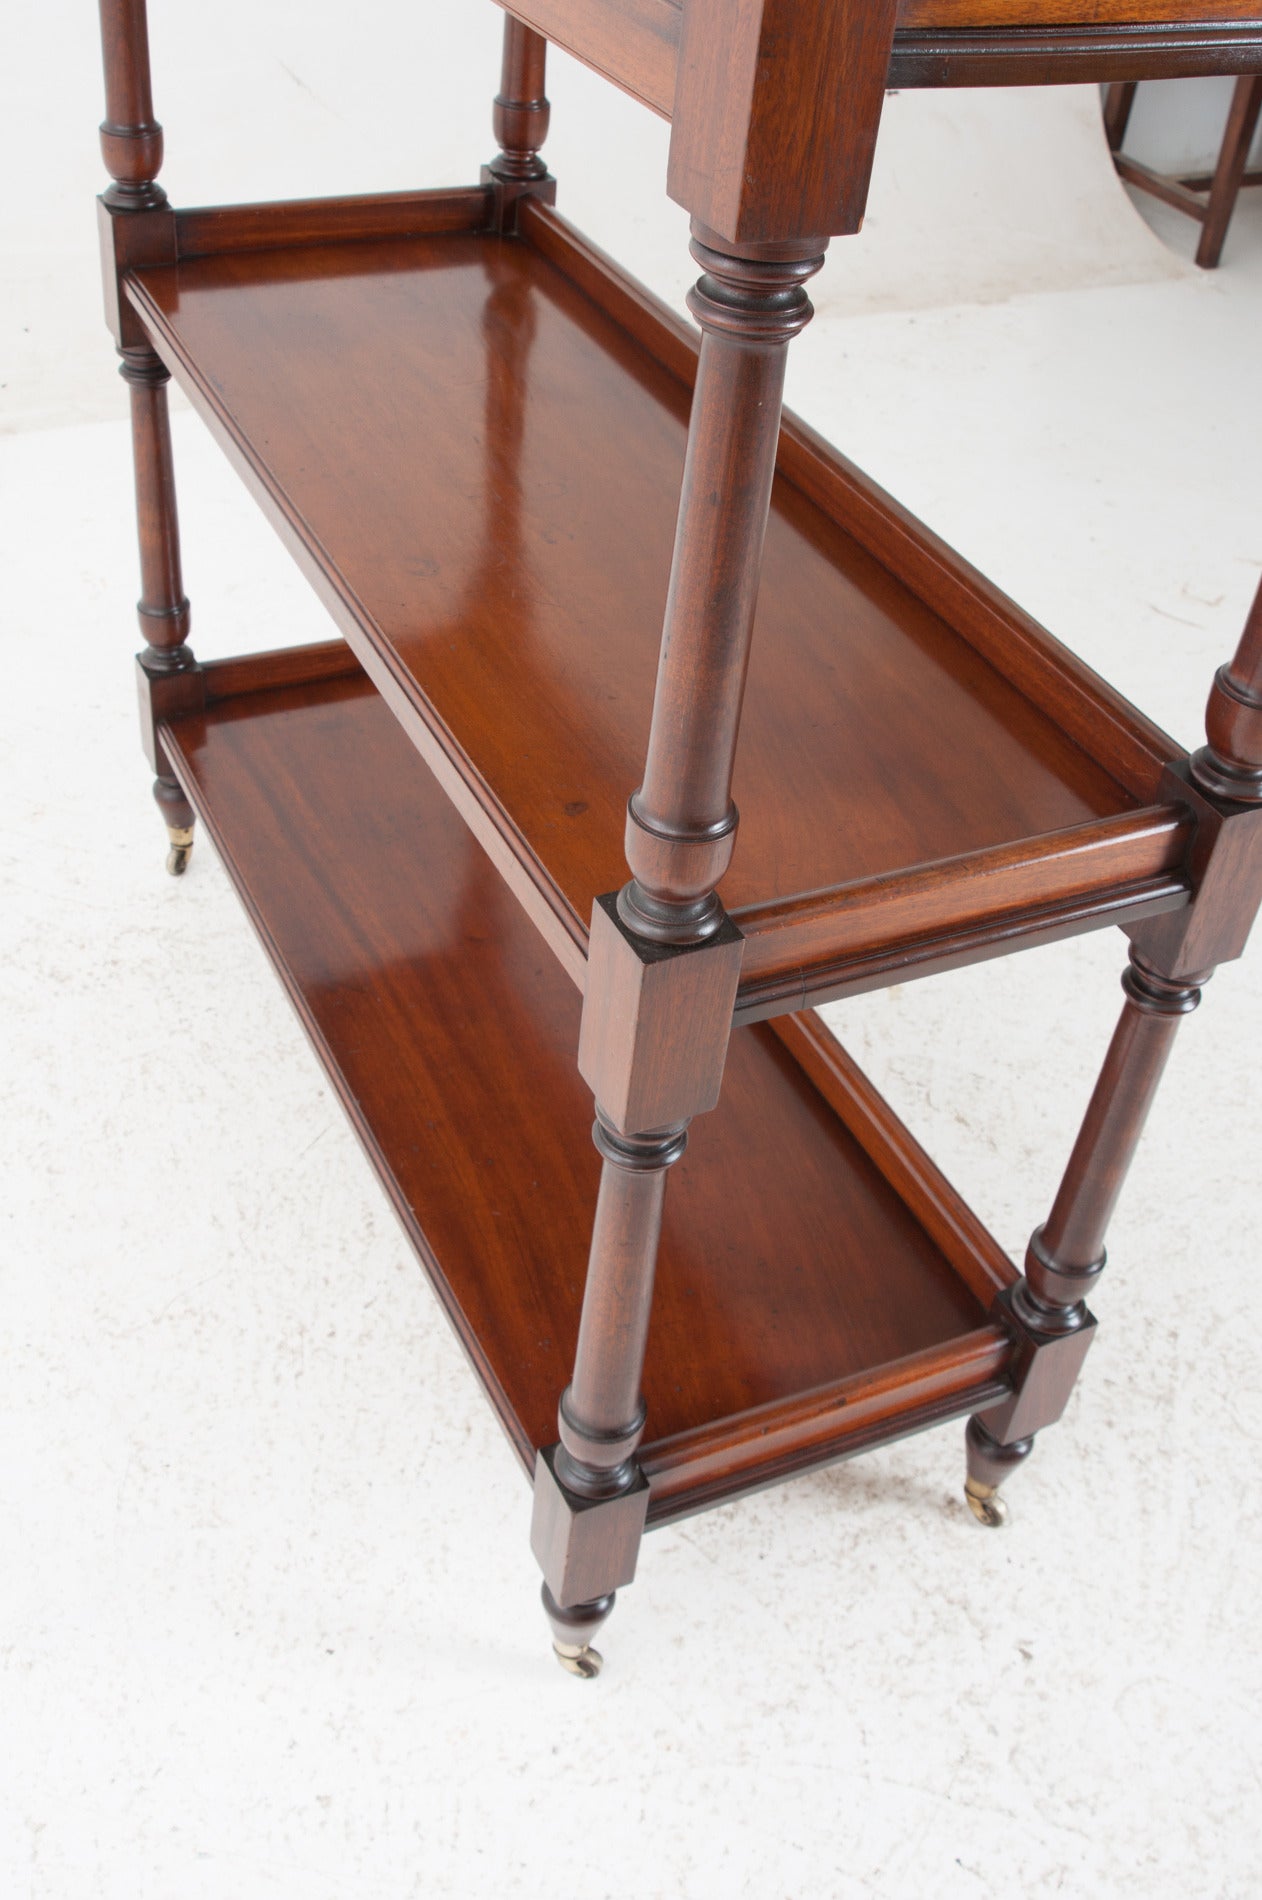 A gorgeous, simply carved mahogany trolley for serving food, drinks or stacking your collectibles. We love how versatile this antique is! This trolley retains its beautiful, rich, original color and patina and has a fresh French polish. 1850